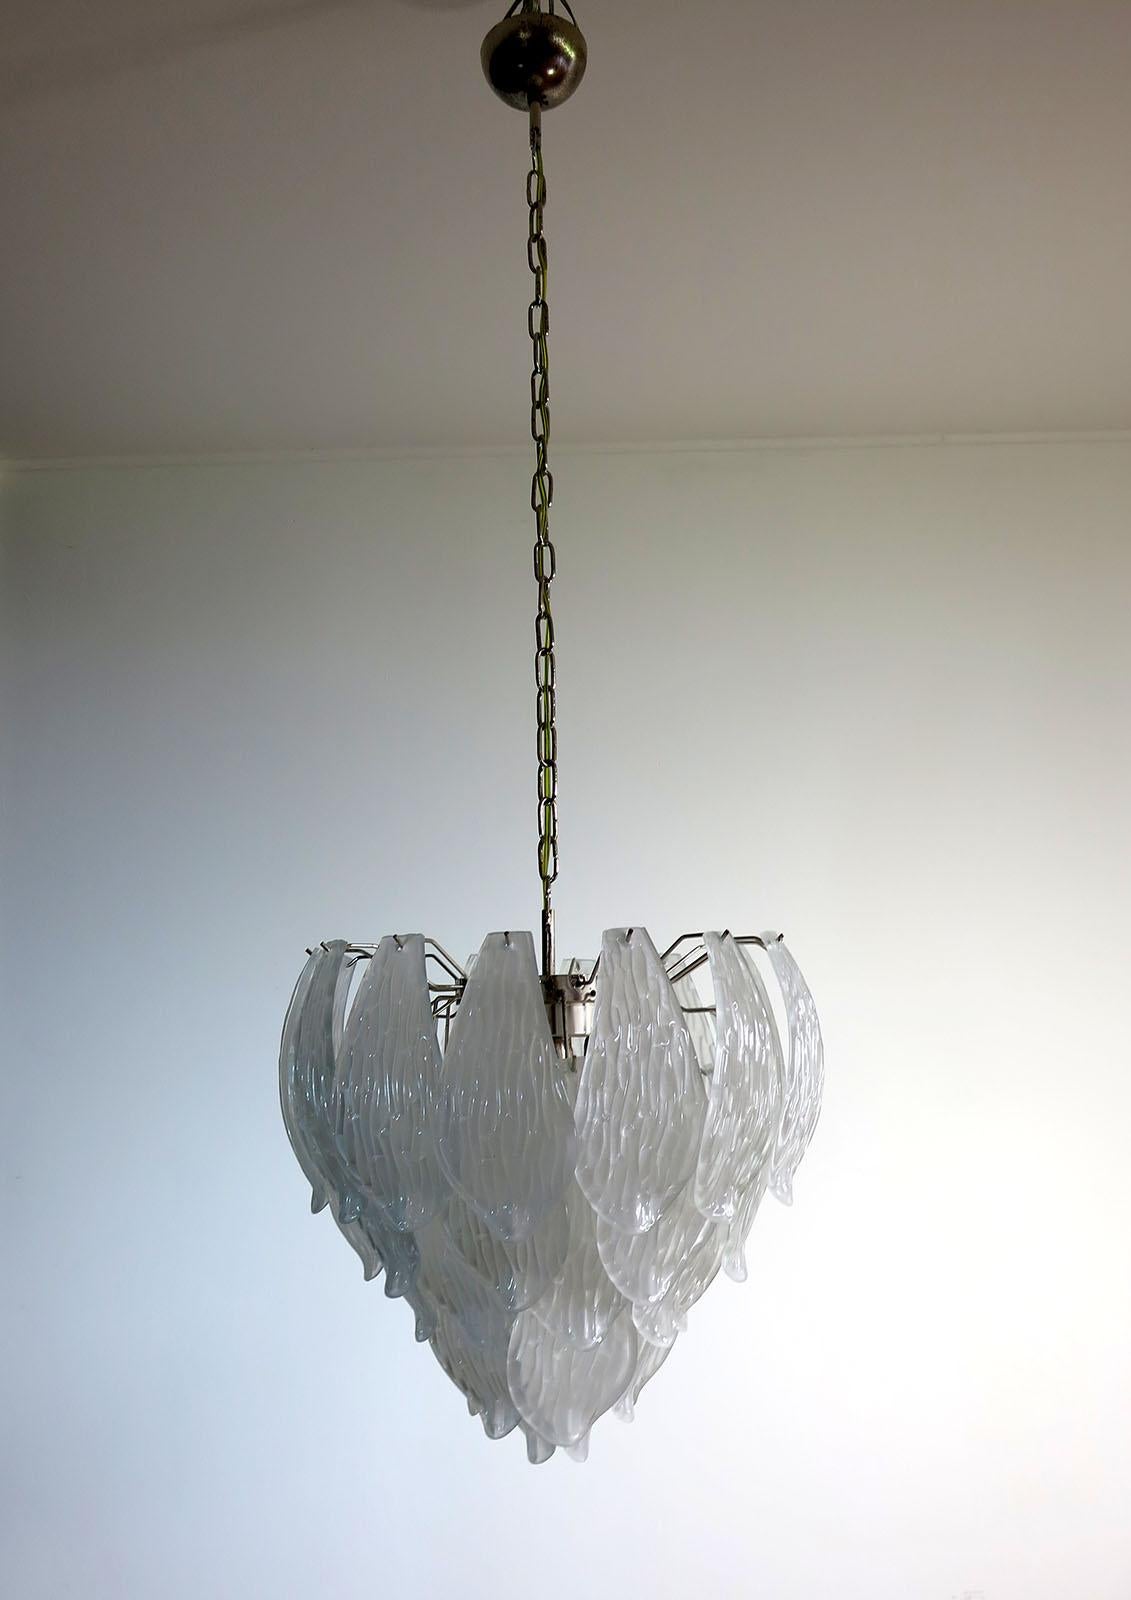 Huge Italian vintage Murano chandelier made by 41 hand blown transparent frosted carved glass leaves in a
chrome frame.
Period: 1970s-1980s
Dimensions: 49.20 inches (125 cm) height with chain, 25.80 inches (68 cm) height without chain, 21.25